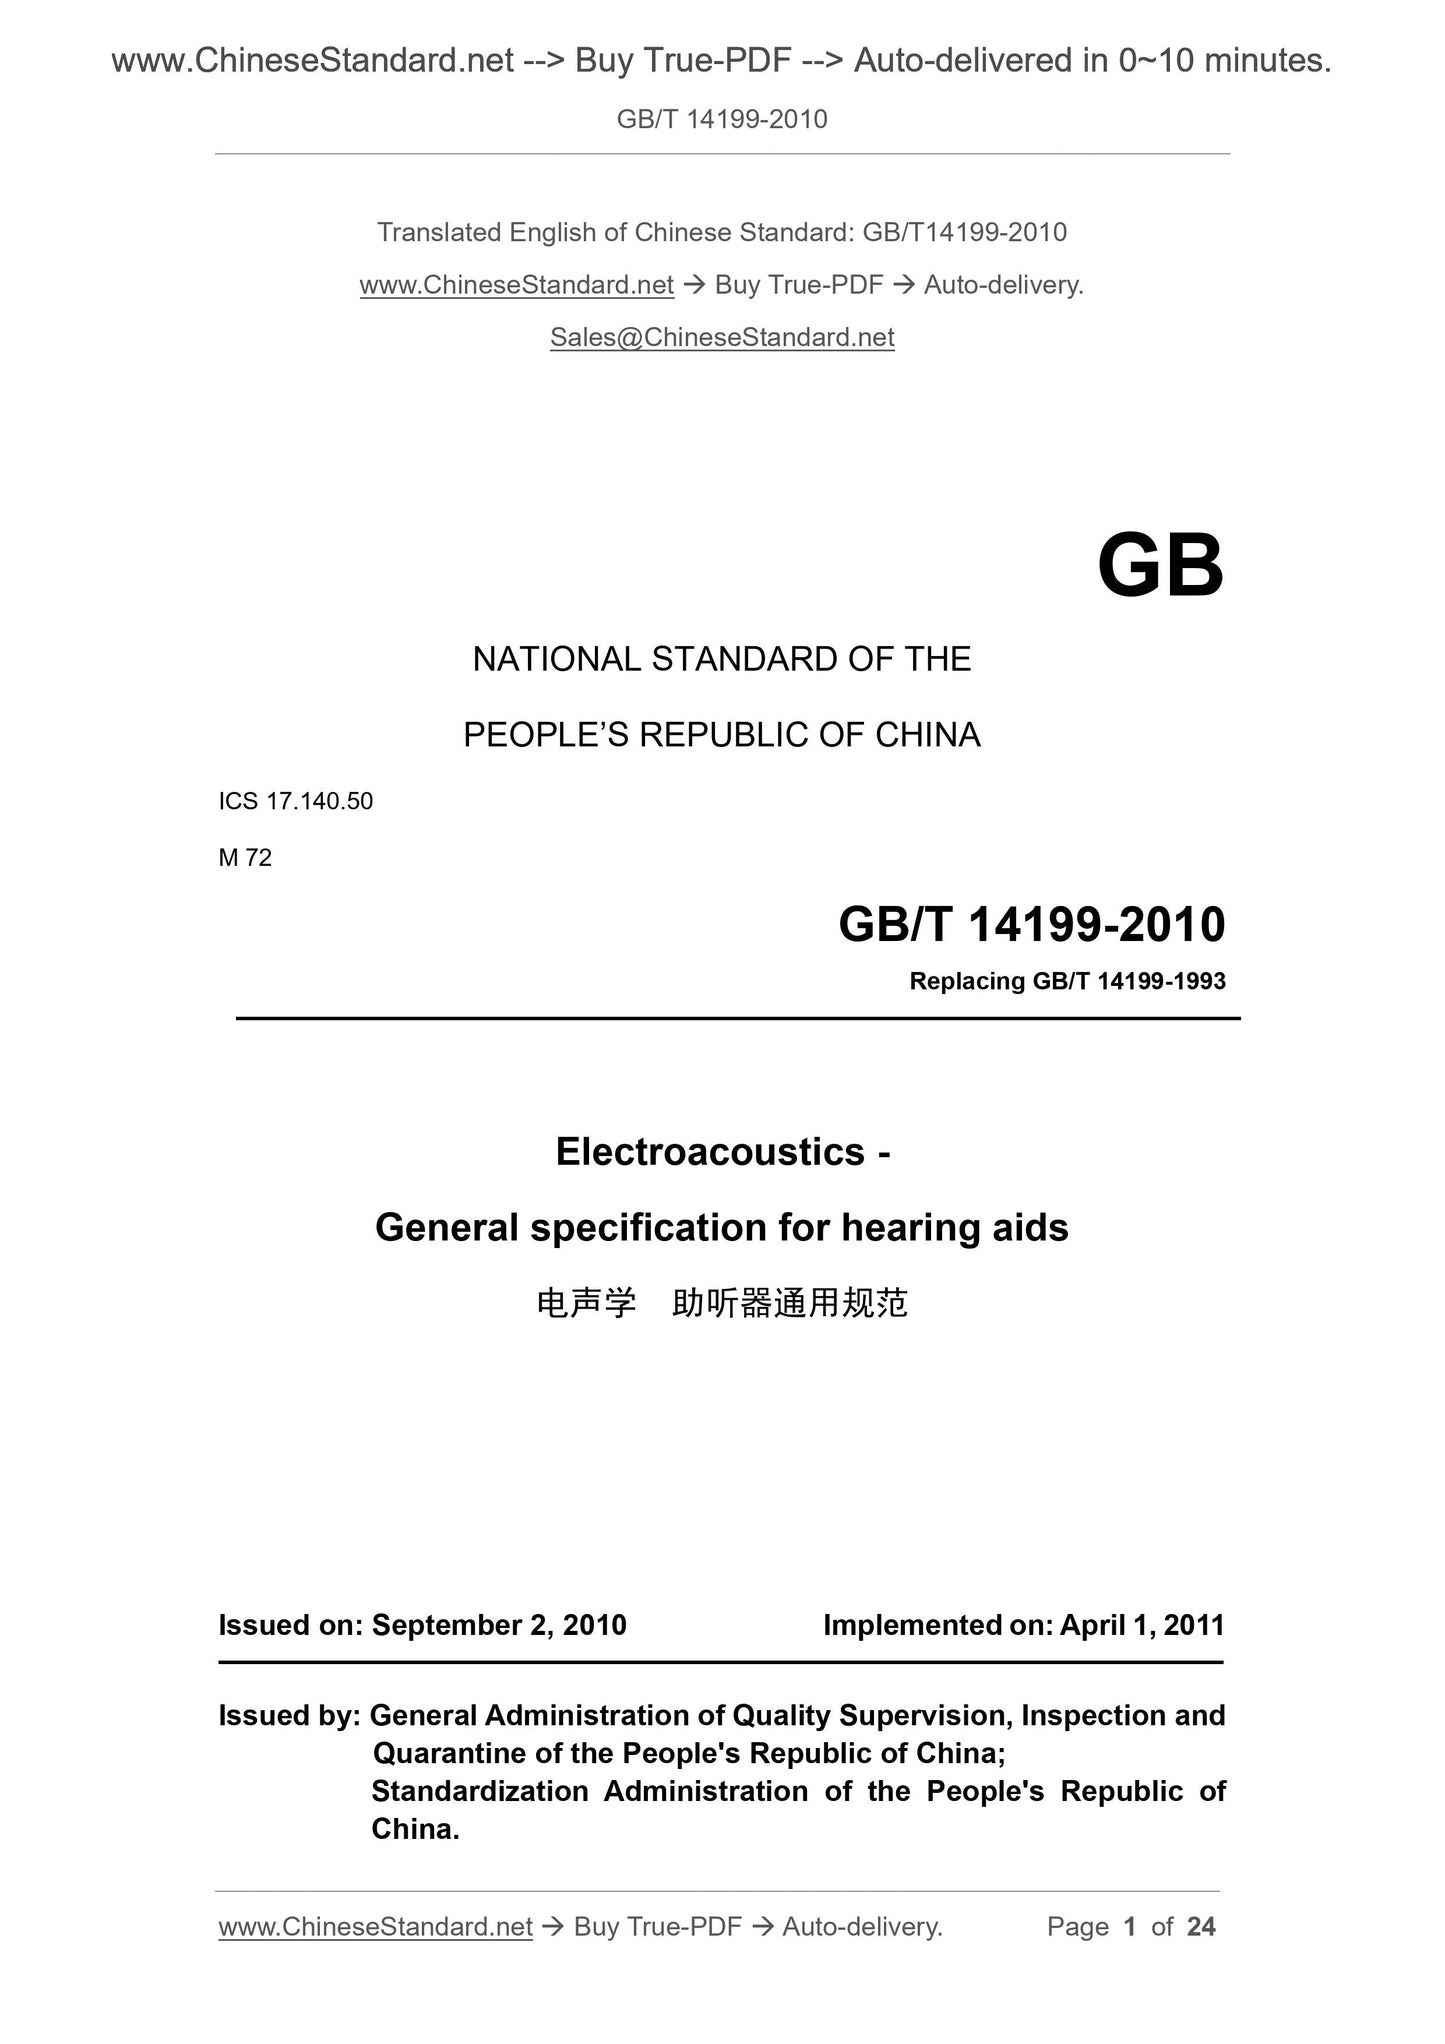 GB/T 14199-2010 Page 1